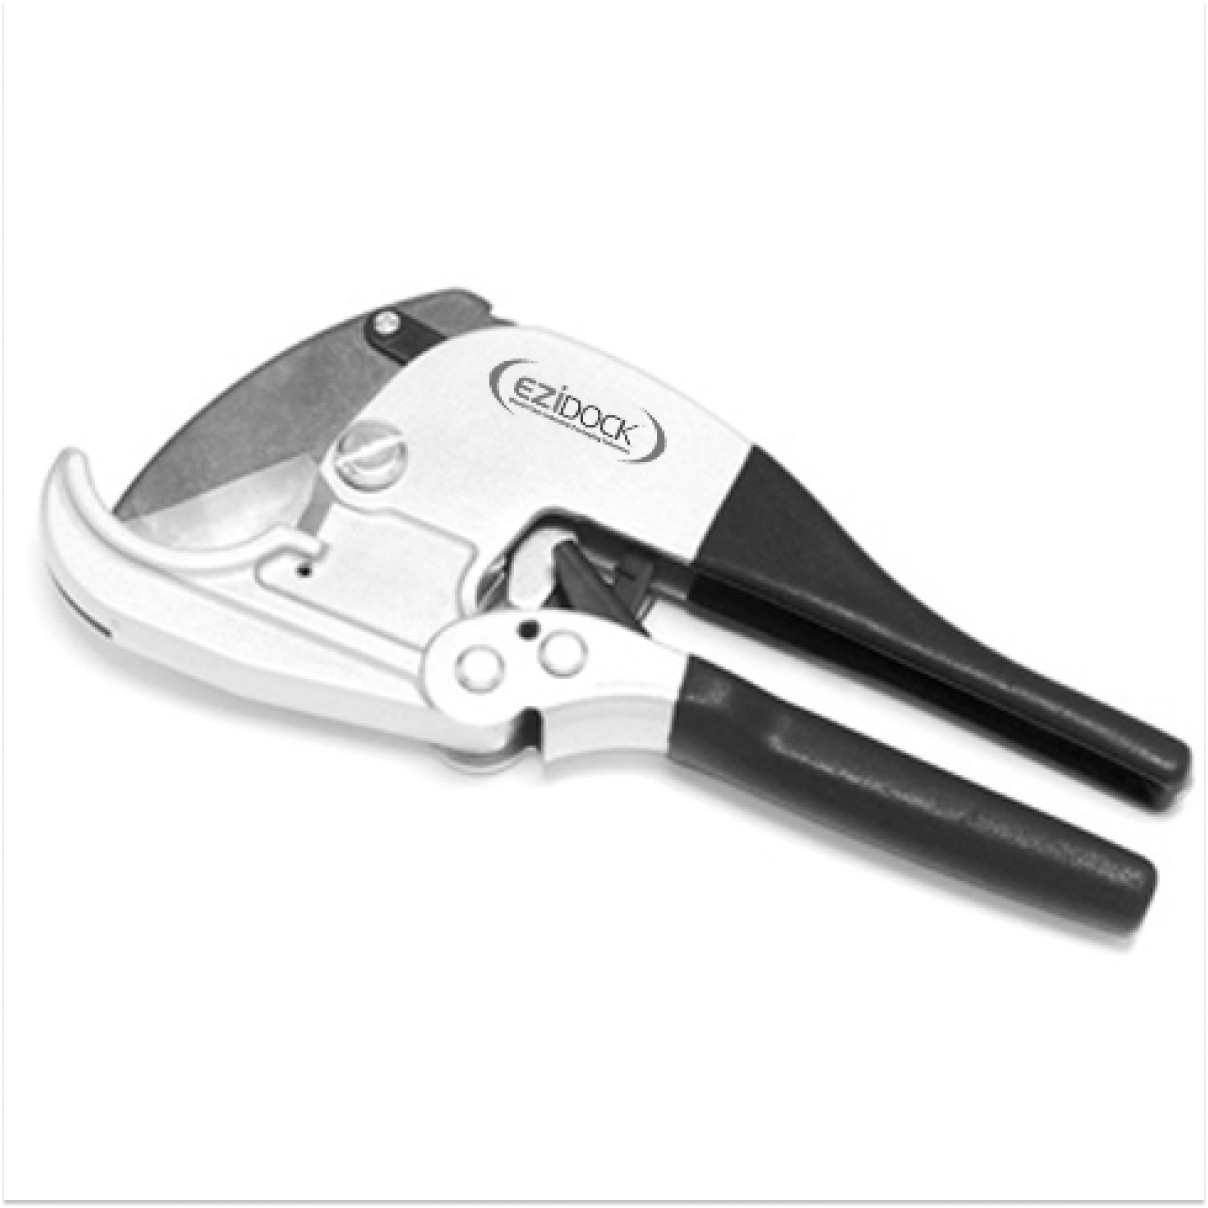 PALLET TO INCLUDE EZIDOCK EZI-STRAP GRADUATED CUTTER RRP £1600, Ezi-Strap graduated cutters can carefully cut down the middle of the Ezi-Strap Liner Tie. Description. Allowing the two halves to be sa